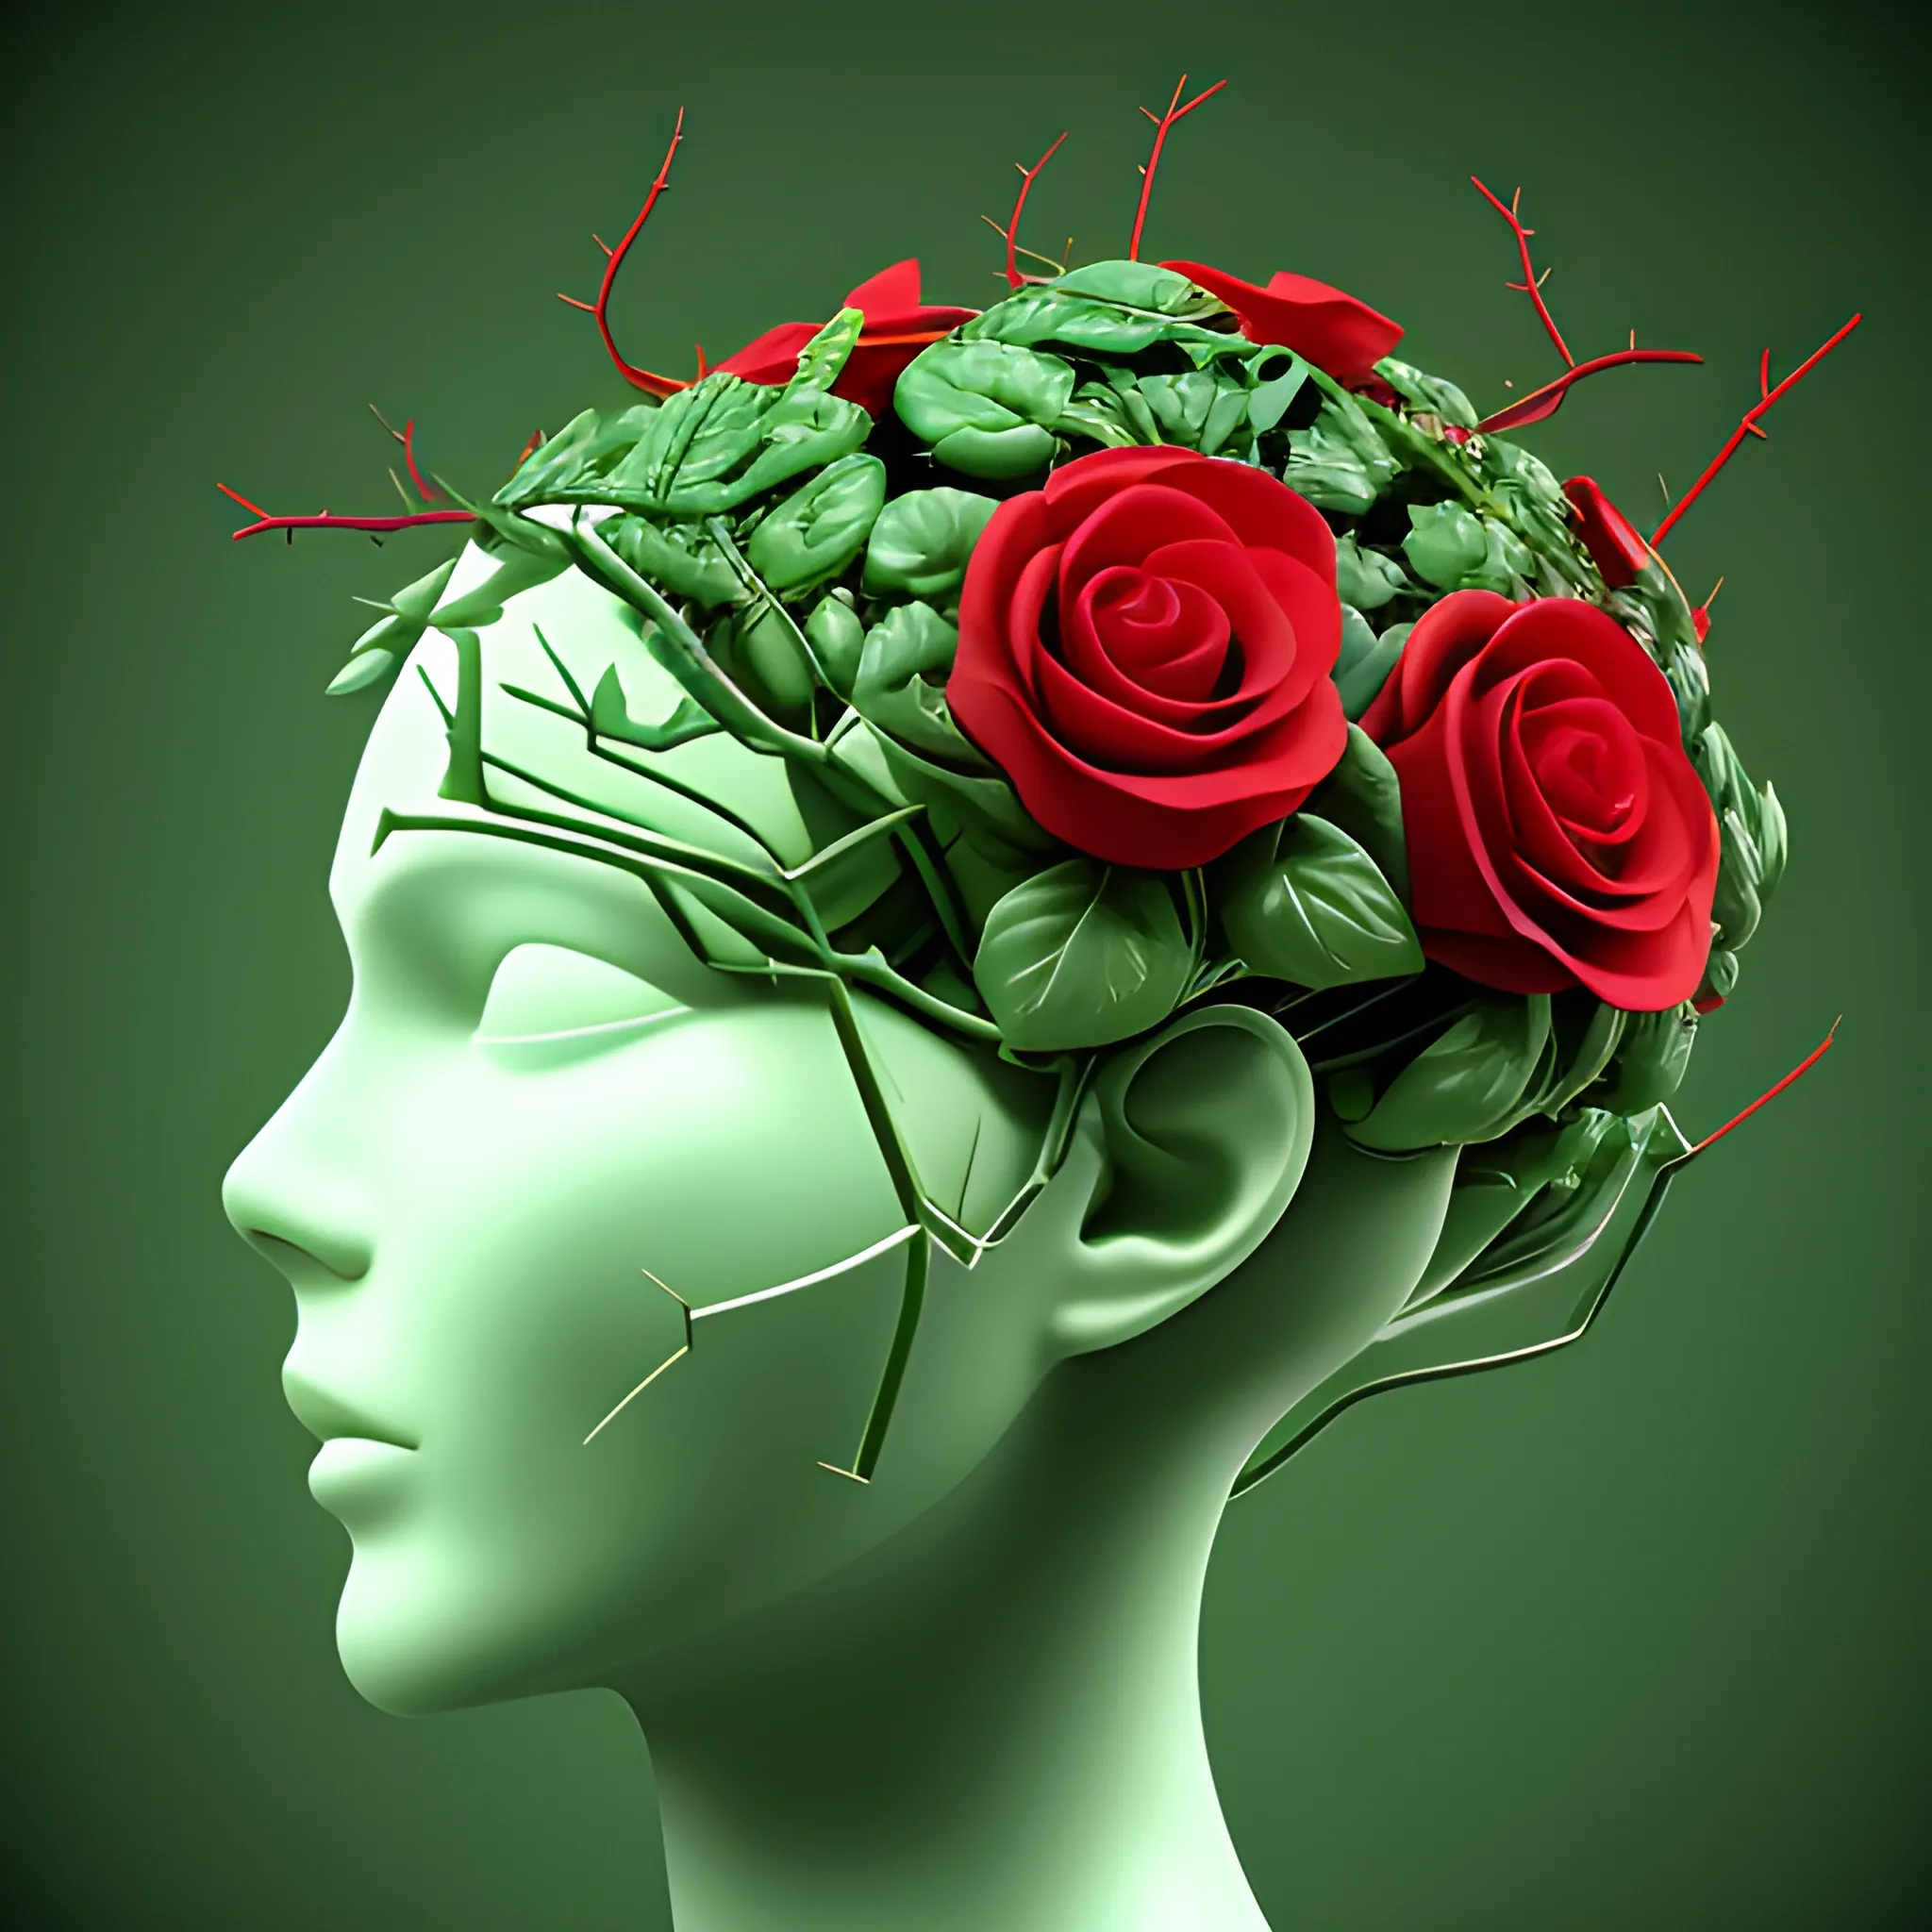 brain only with red roses and green vines with thorns on them growing out of the brain like a garden, 3D